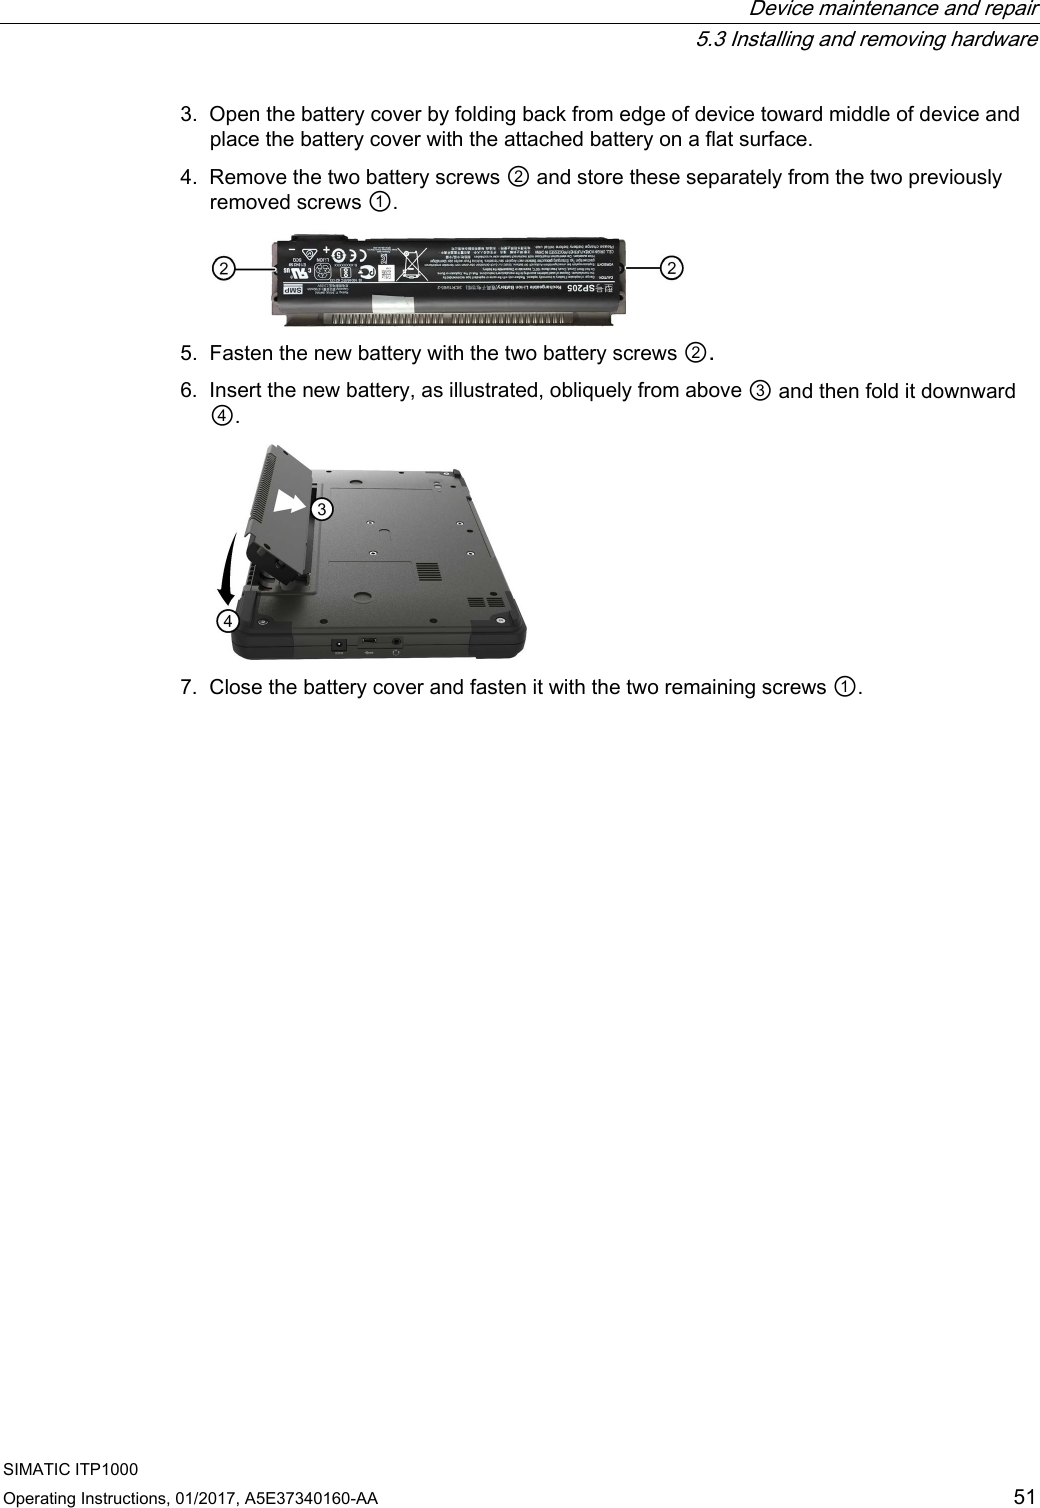  Device maintenance and repair  5.3 Installing and removing hardware SIMATIC ITP1000 Operating Instructions, 01/2017, A5E37340160-AA  51 3. Open the battery cover by folding back from edge of device toward middle of device and place the battery cover with the attached battery on a flat surface. 4. Remove the two battery screws ② and store these separately from the two previously removed screws ①.  5. Fasten the new battery with the two battery screws ②. 6. Insert the new battery, as illustrated, obliquely from above ③ and then fold it downward ④.  7. Close the battery cover and fasten it with the two remaining screws ①. 